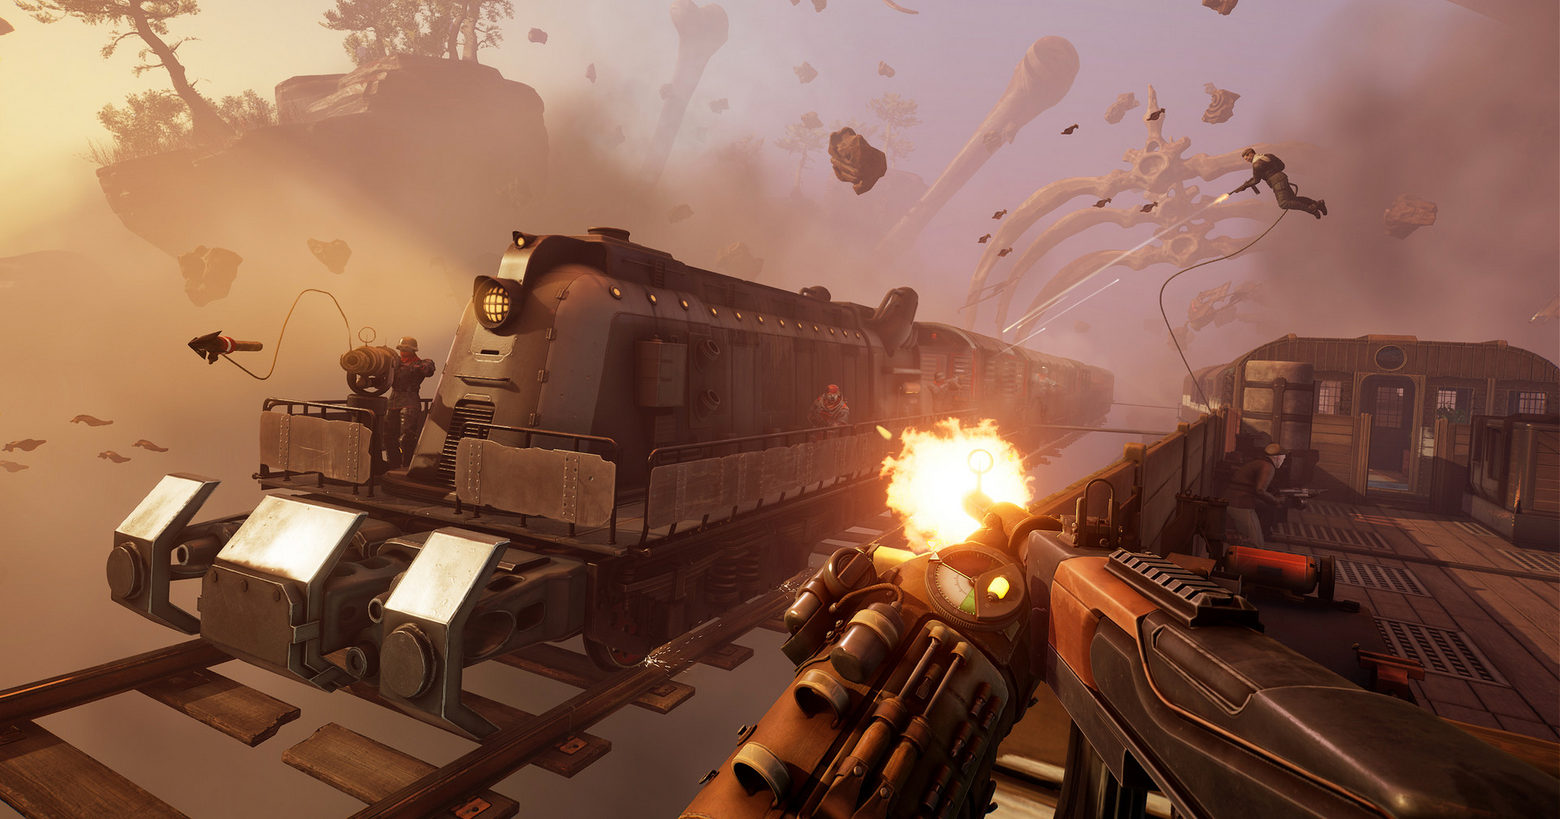 The player stands on a train shooting at the opponent of another train in first-person. The world in Voidtrain is an alien dimension.